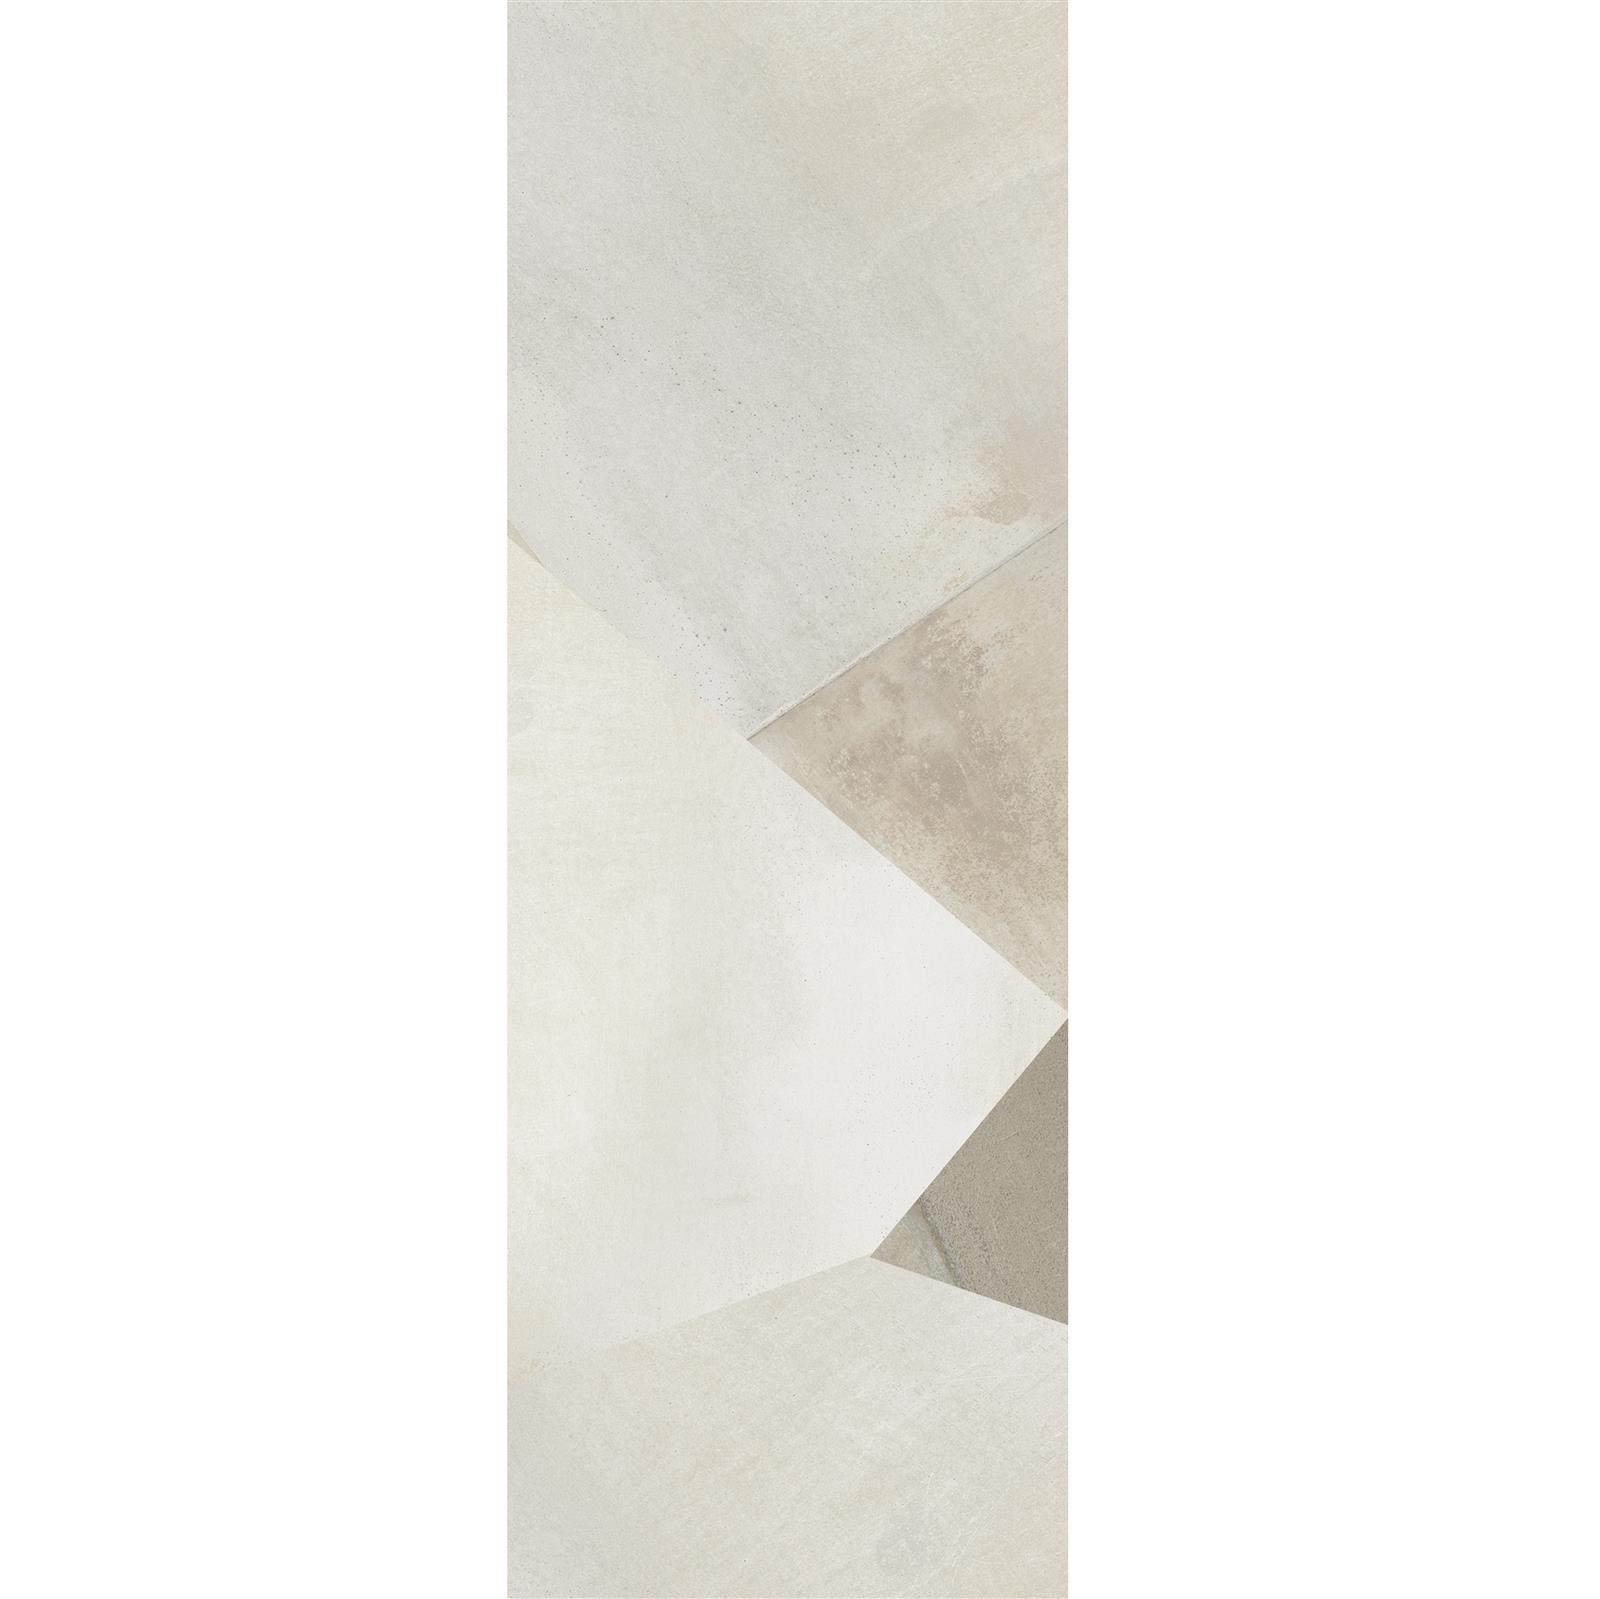 Wall Tiles Queens Rectified Sand Decor 3 30x90cm